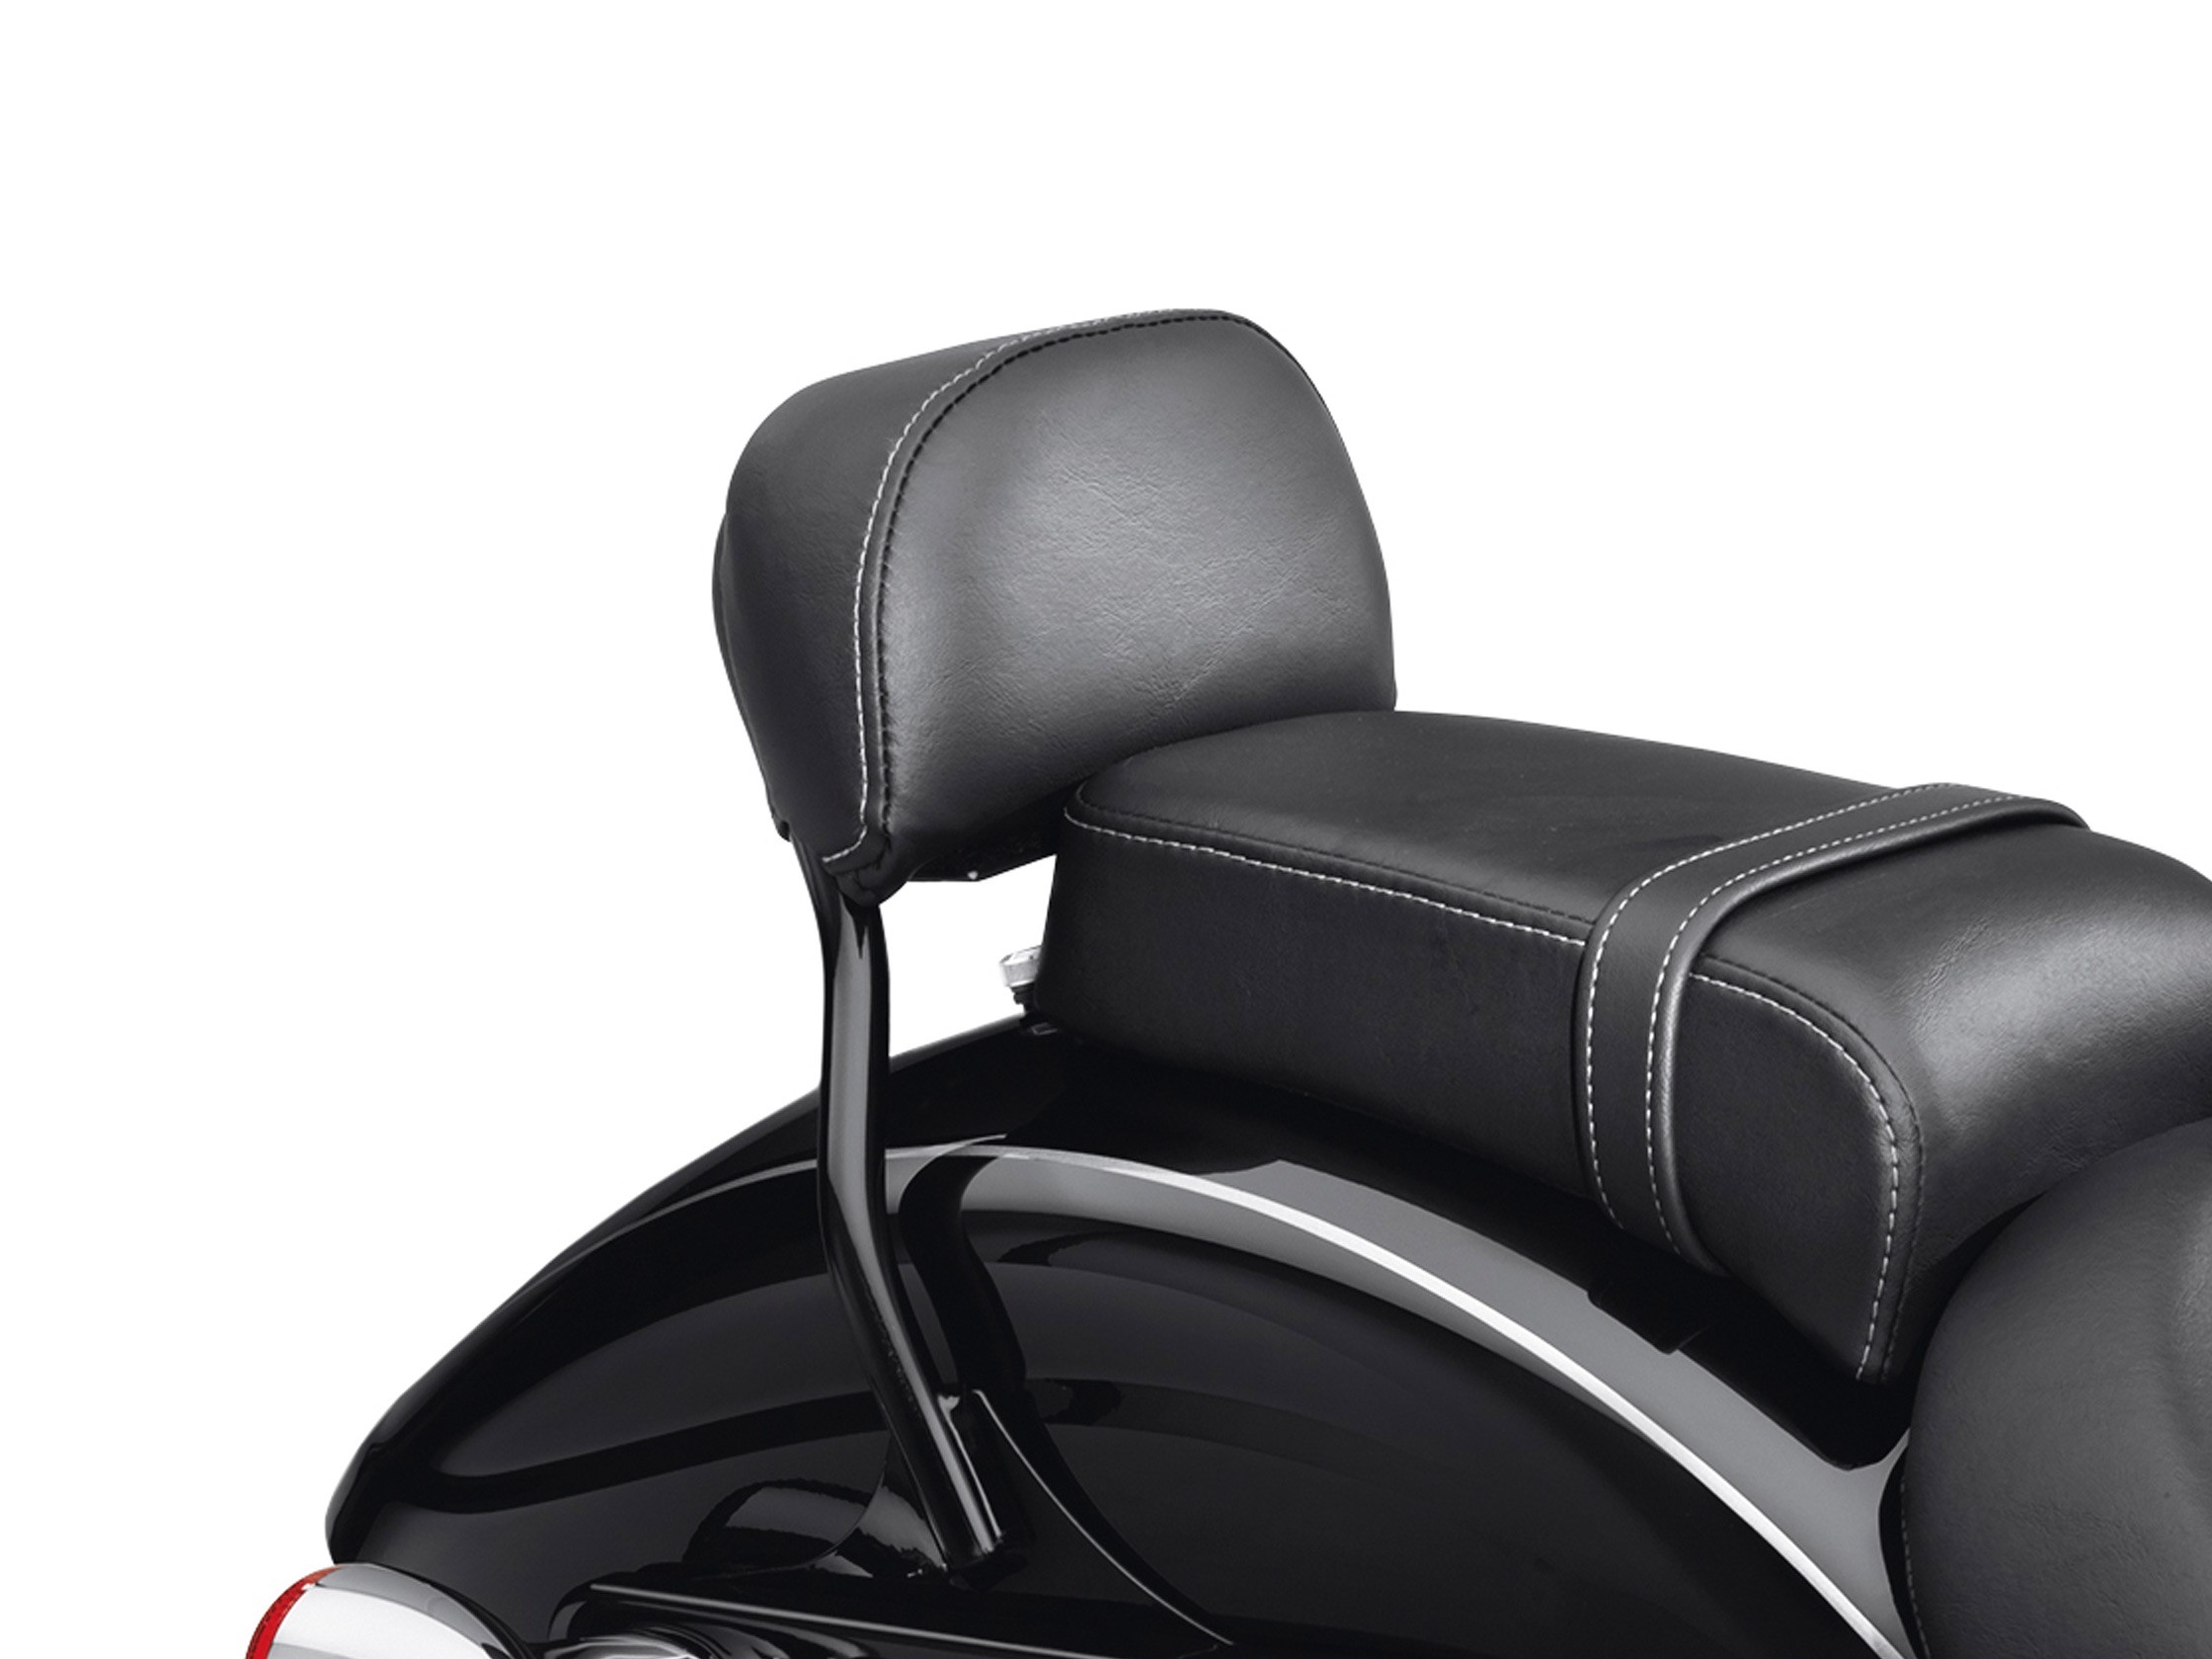 Small, low sissy bar/ pad.   Arch-support-low-backrest-with-pad-sportster